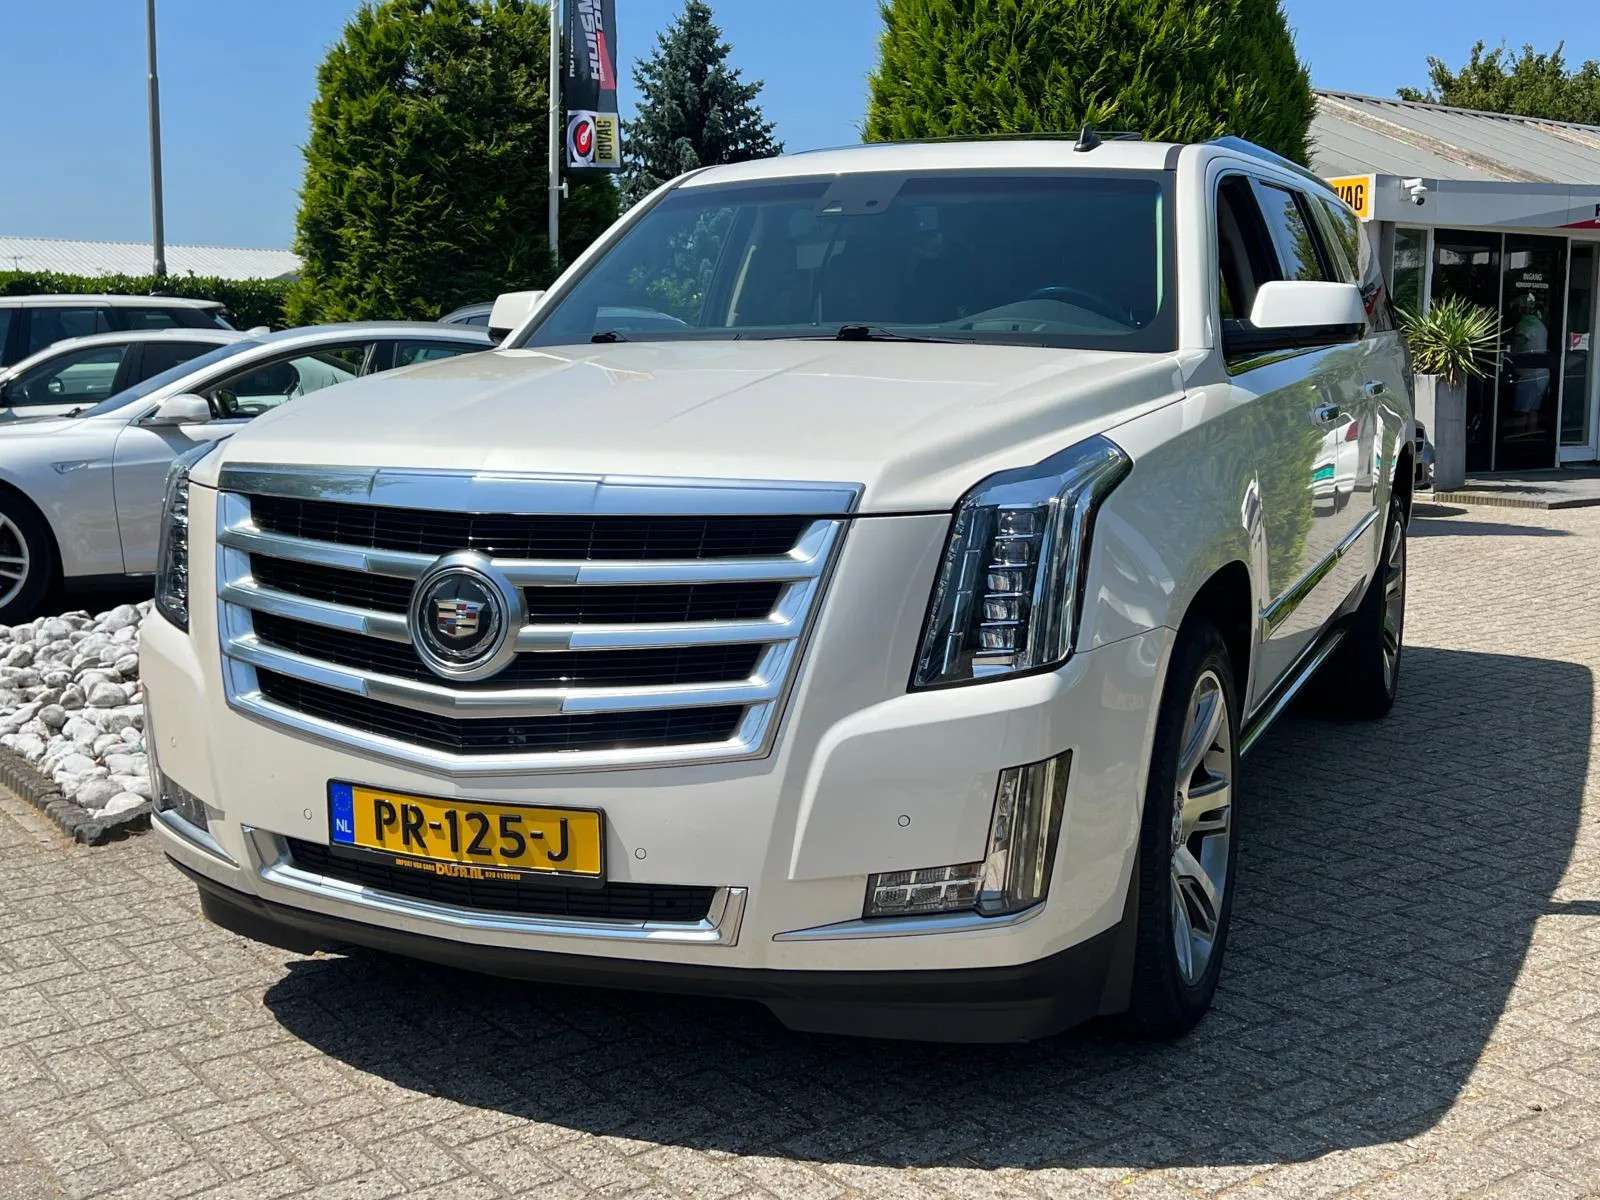 Cadillac Escalade Off-Road/Pick-up in White used in RUINERWOLD for € 59,950.-